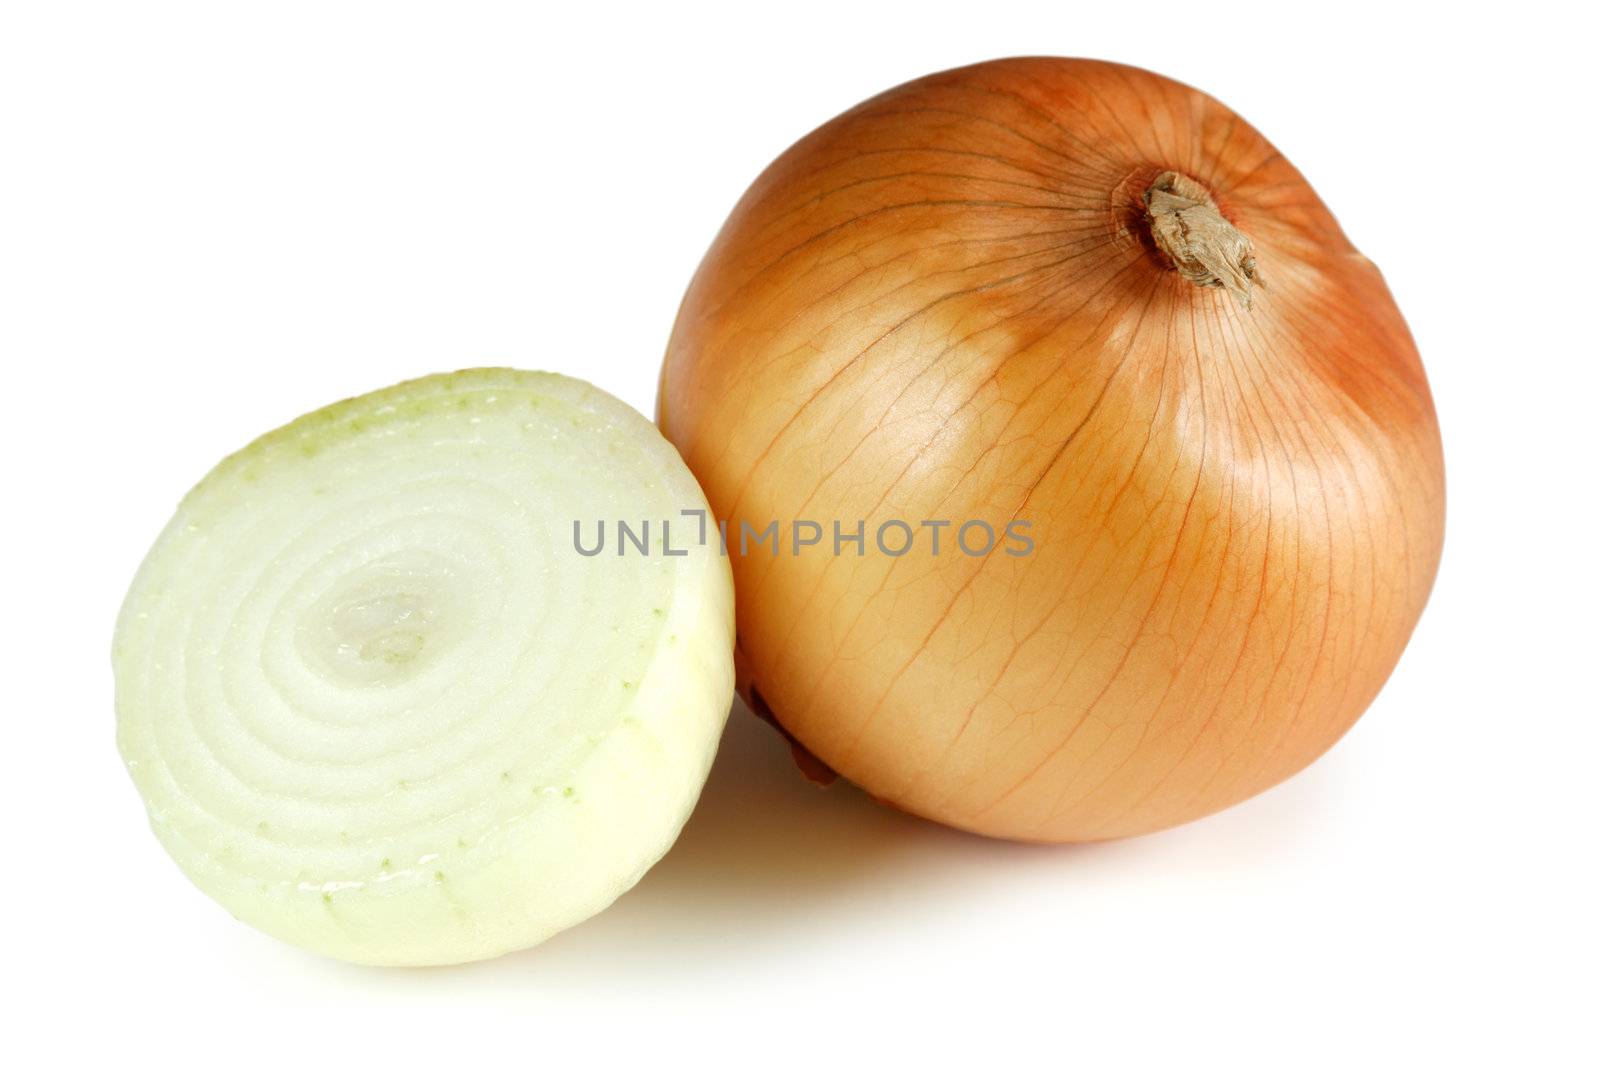 Photo of two onions, one full with the skin and one sliced in half.